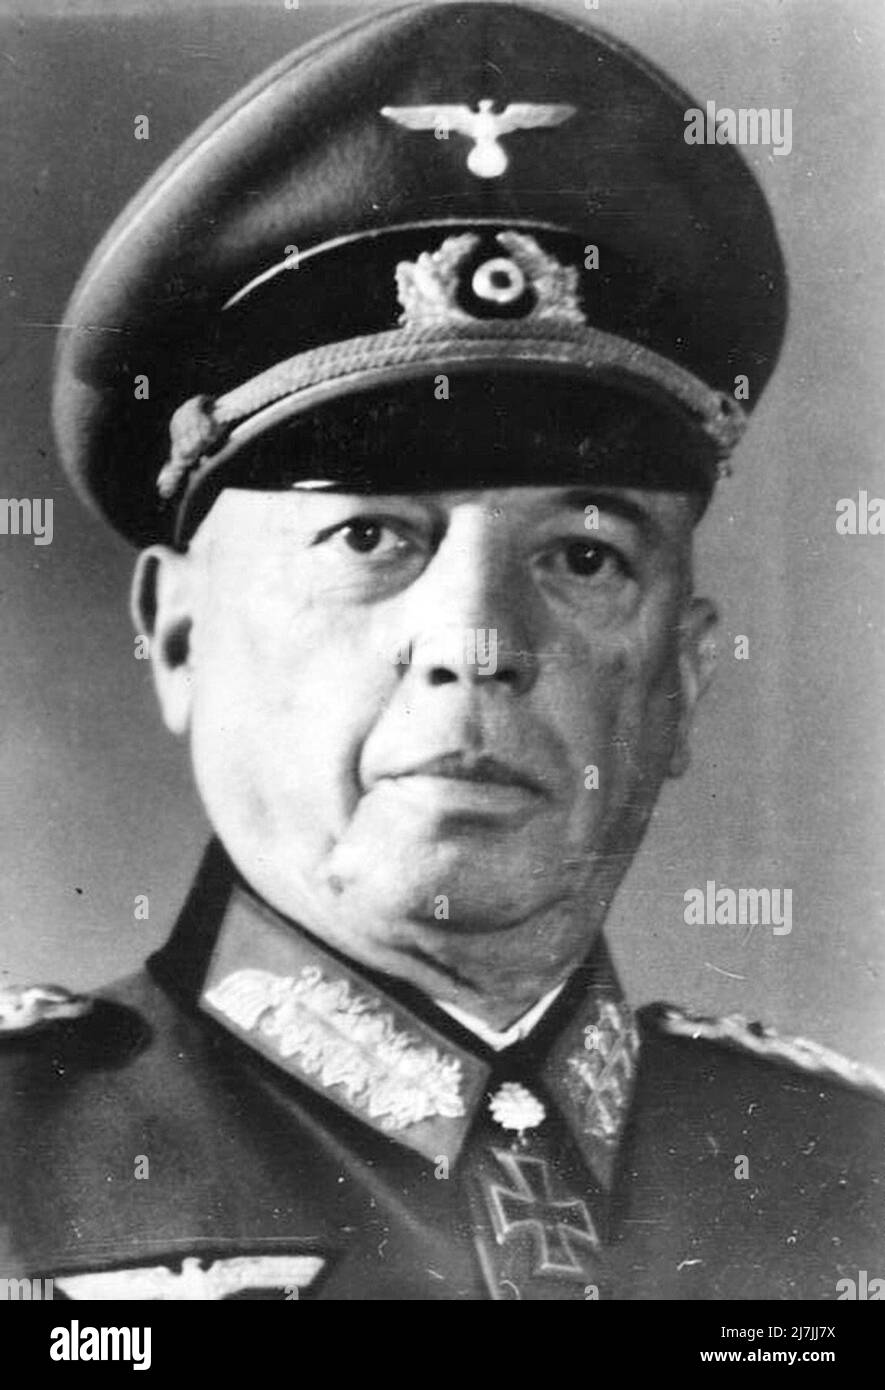 Georg Carl Wilhelm Friedrich von Küchler was a German field marshal during World War II. He commanded the 18th Army and Army Group North during the Soviet-German war of 1941–1945. After the war he was convicted of Crimes Against Humanity and spend 50years in prison. Stock Photo